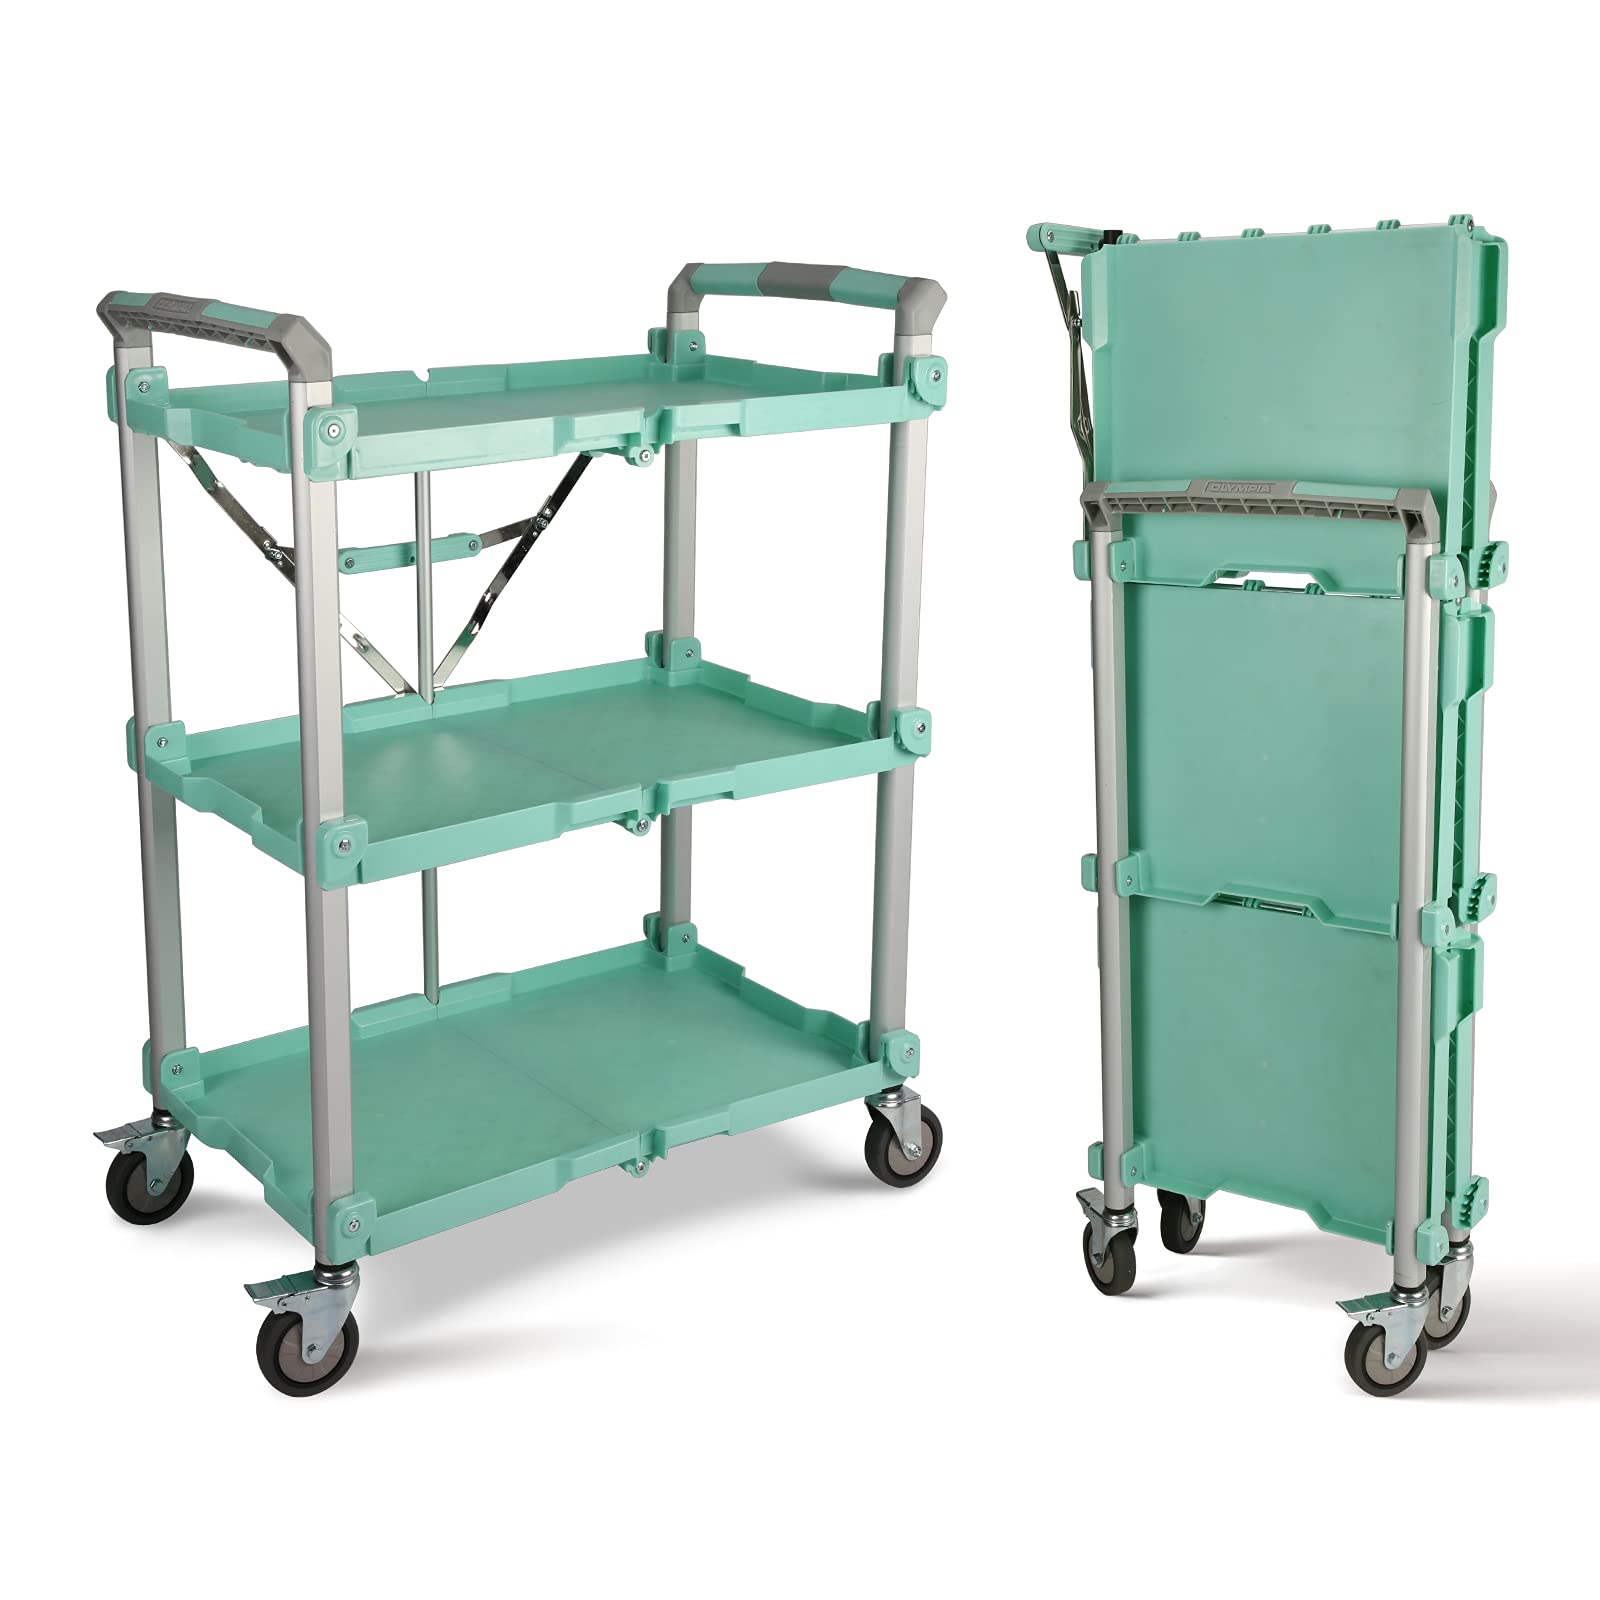 Olympia Tools 89-353 Pack N Roll collapsible Service cart, XL, 300LB capacity, 3-Tiered, green,Teal